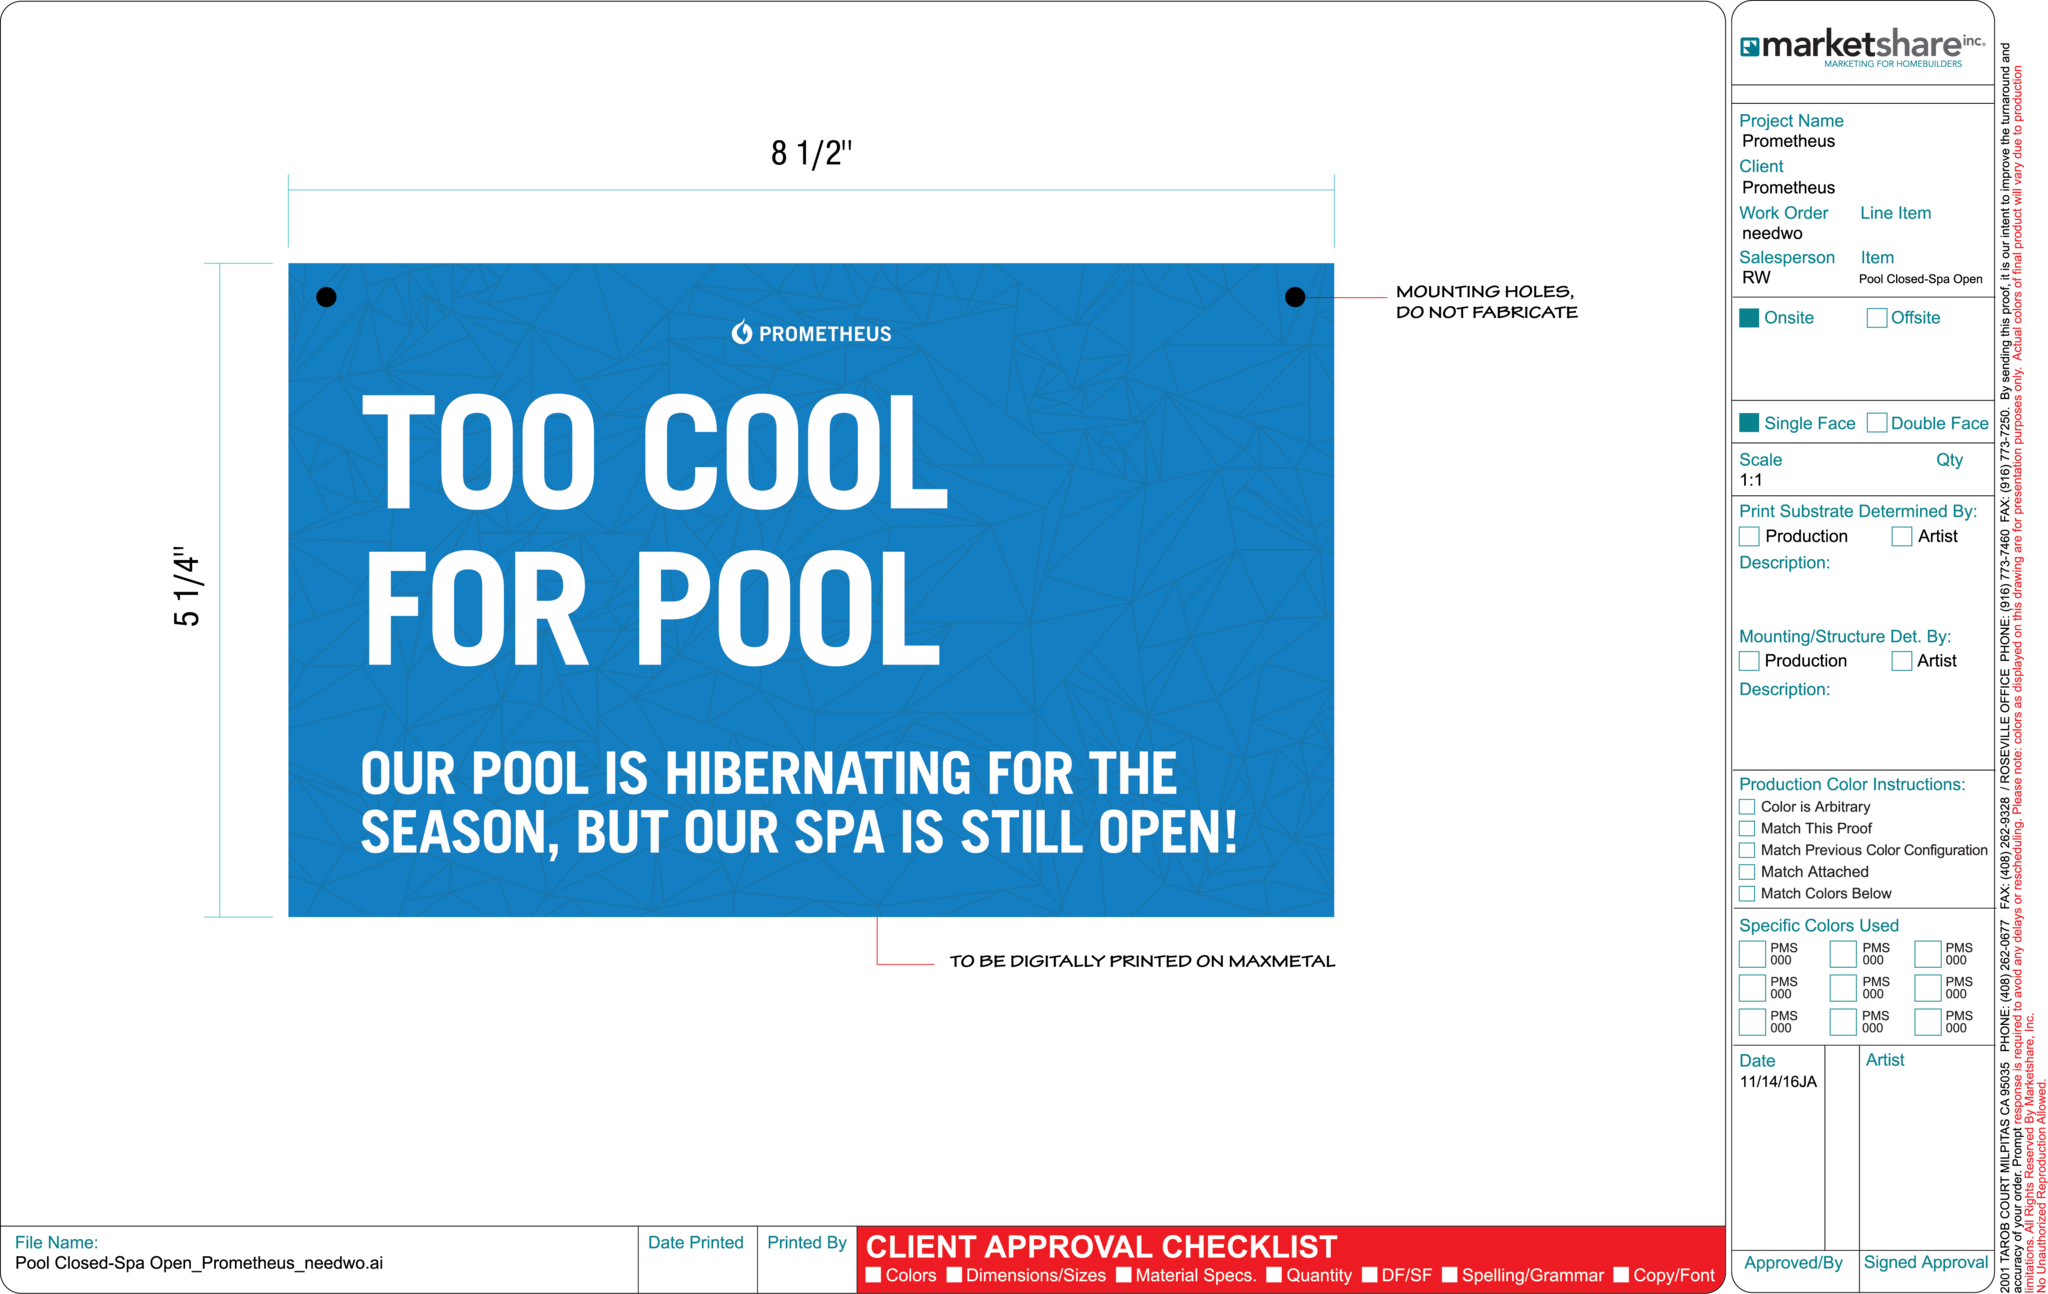 Spa open Only (Too Cool For Pool)